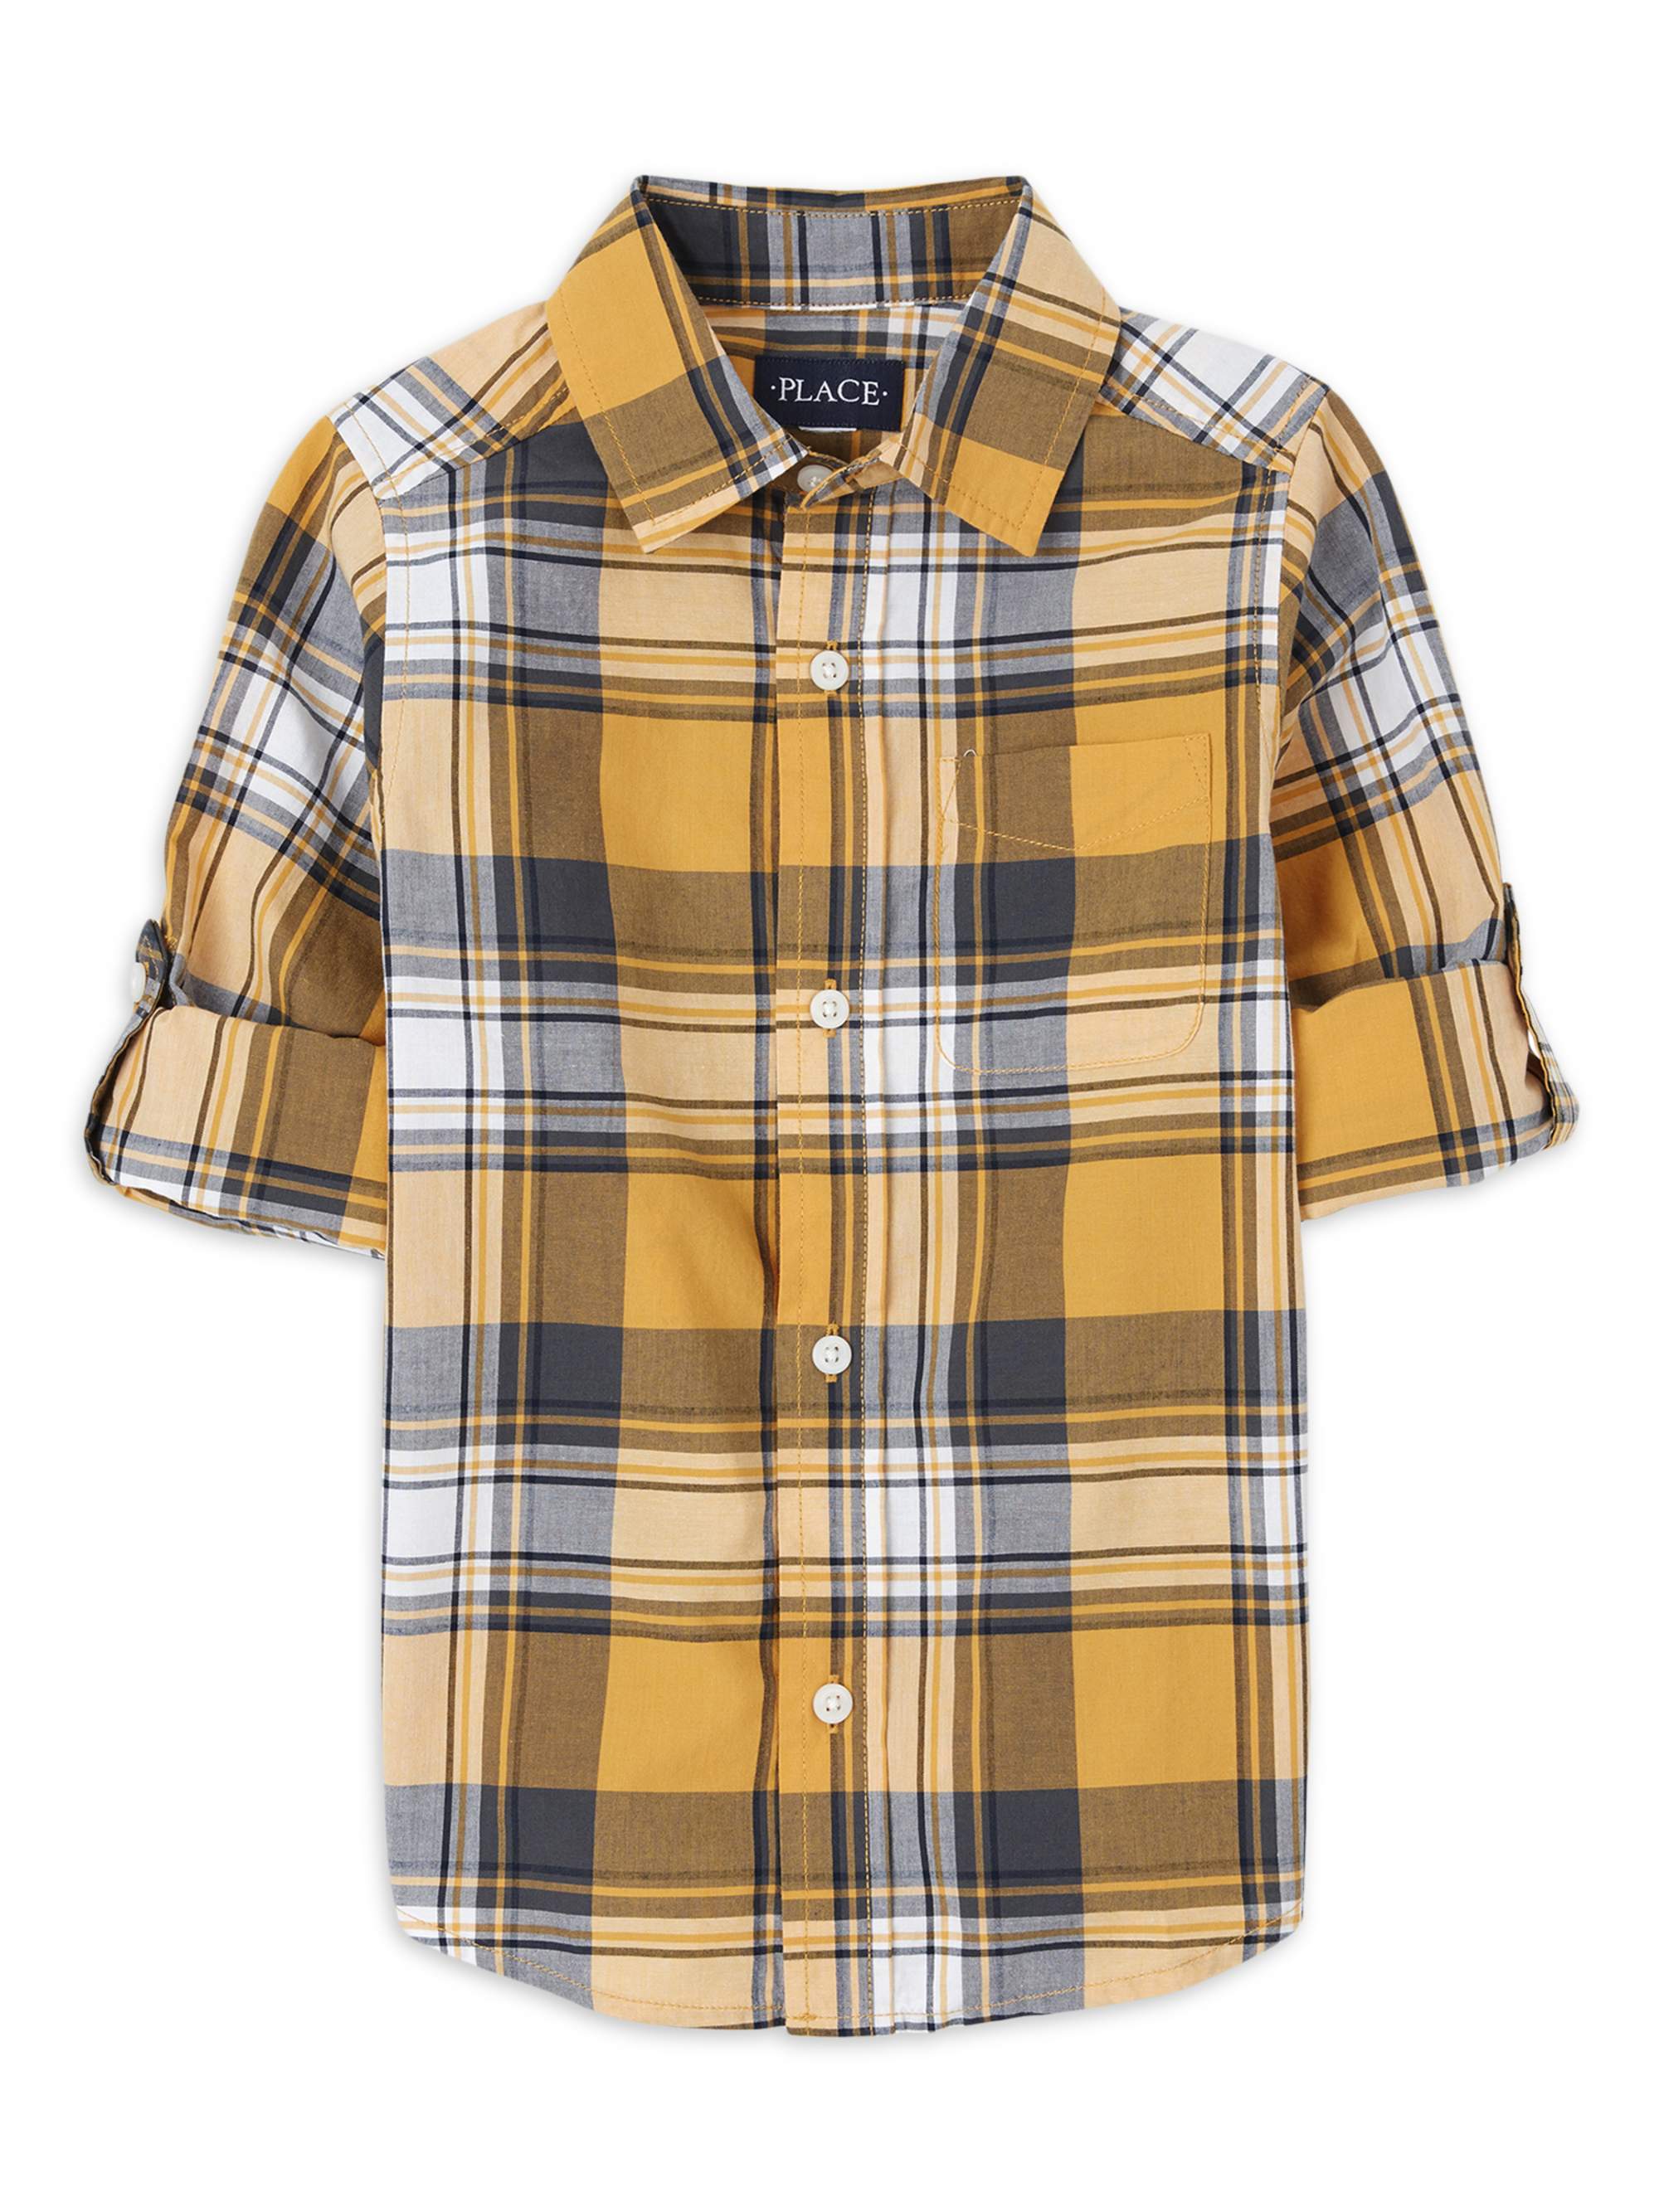 The Children's Place Boys Long Sleeve Plaid Button Down Shirt, Sizes 4-16 - image 1 of 1